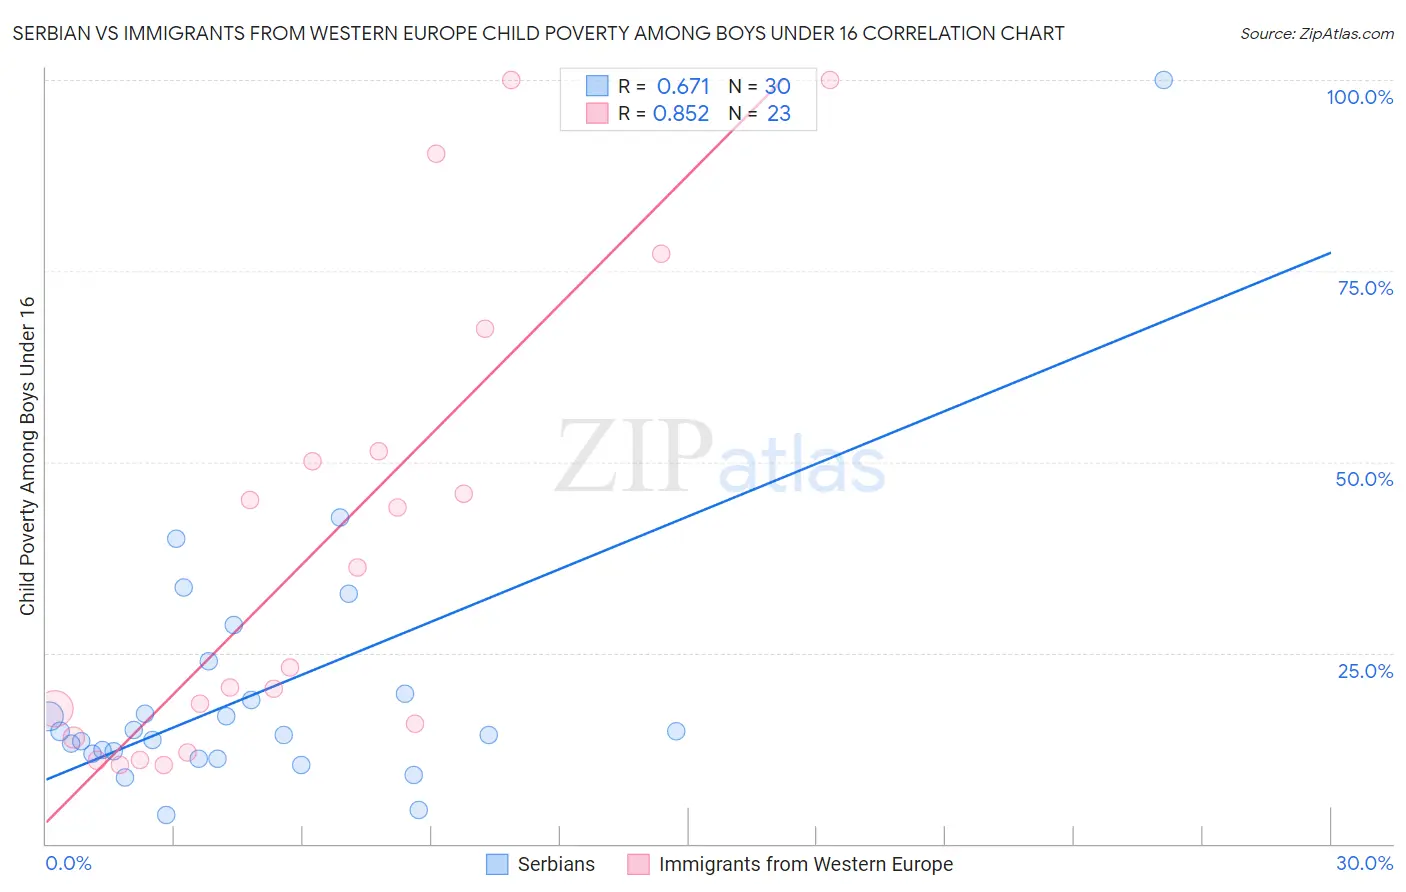 Serbian vs Immigrants from Western Europe Child Poverty Among Boys Under 16